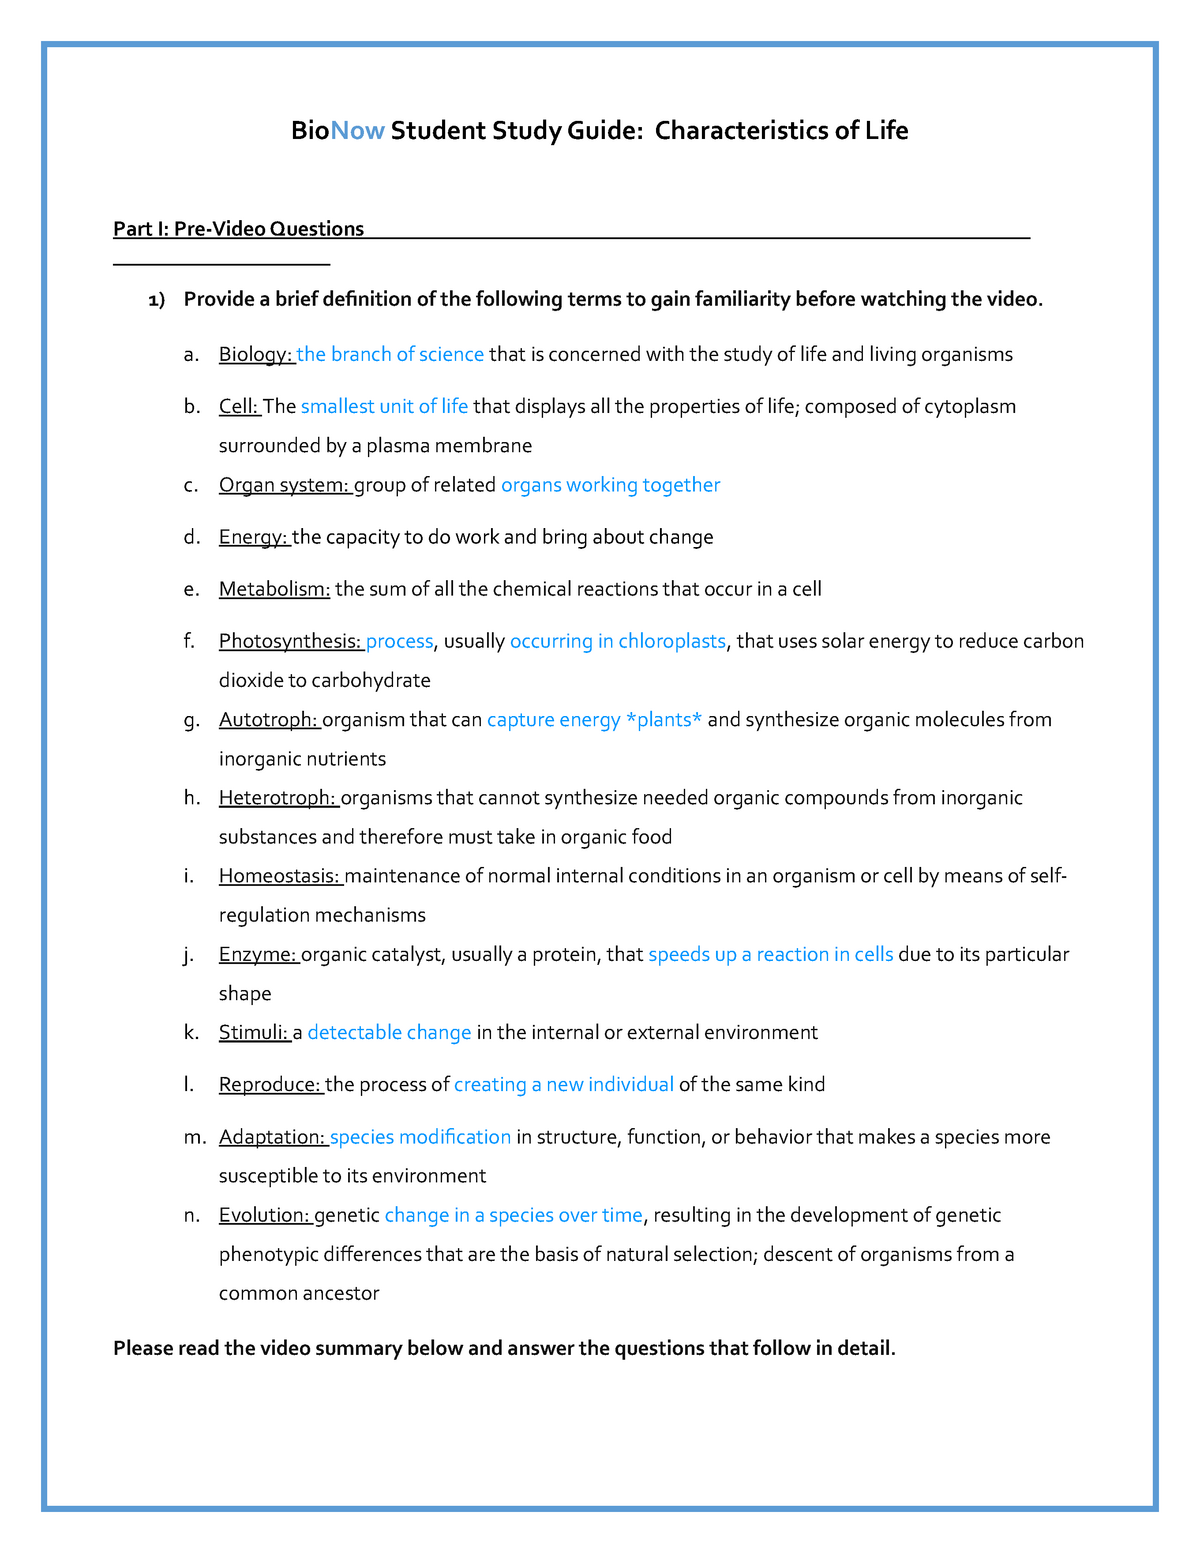 Bio Now Characteristics of Life Notes - BioNow Student Study Guide Regarding Characteristics Of Life Worksheet Answers